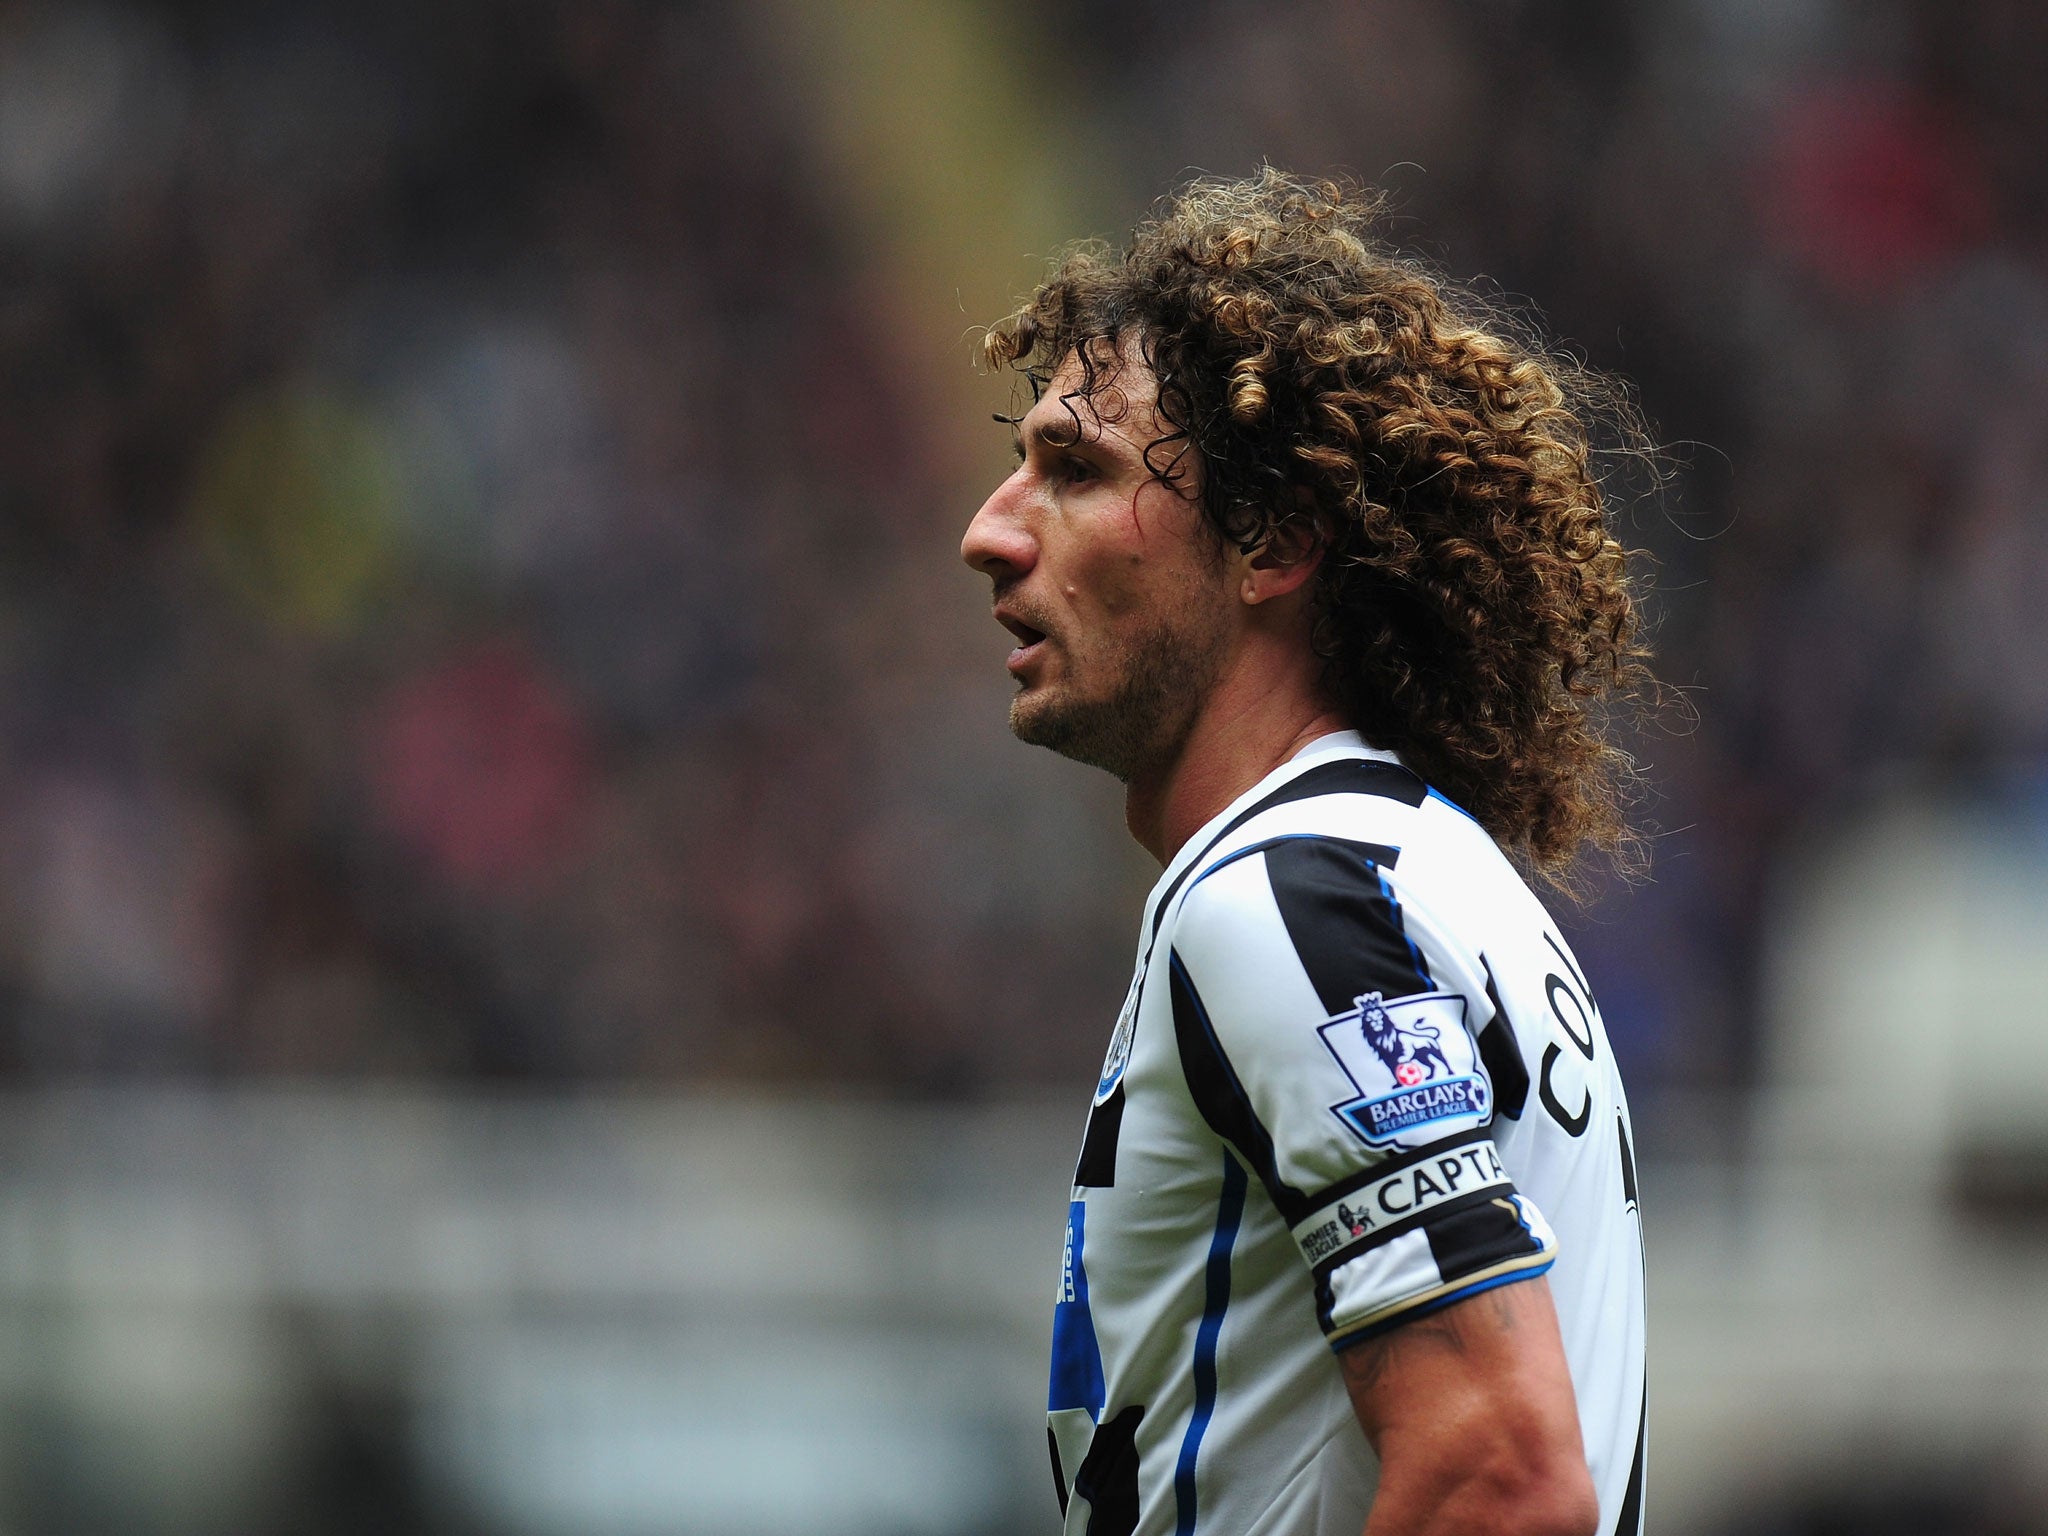 Fabricio Coloccini has been praised by Newcastle manager Alan Pardew for his early comeback against Aston Villa